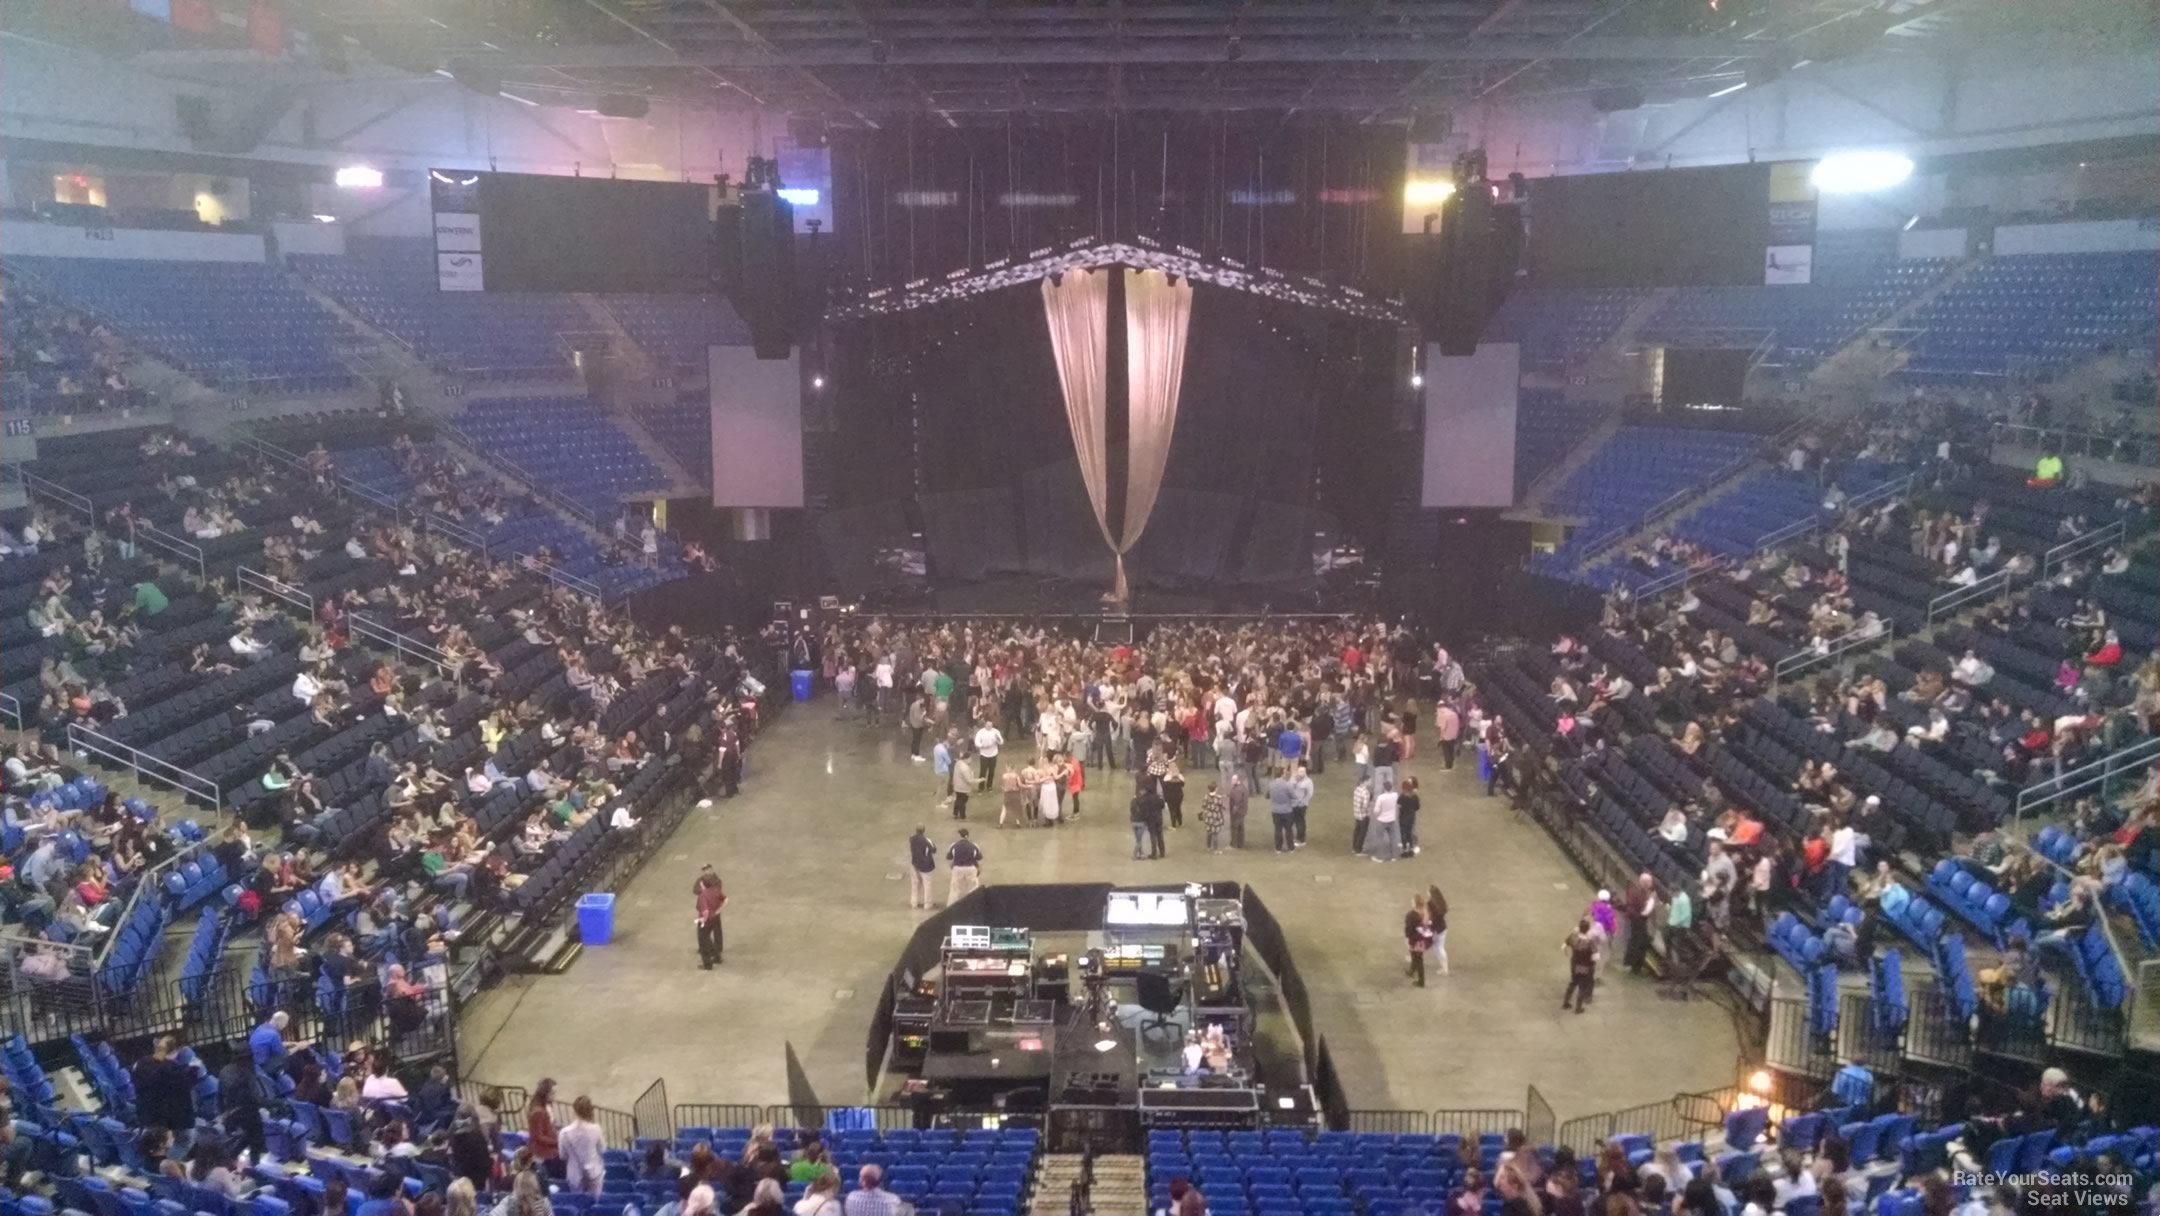 section 209, row d seat view  for concert - chaifetz arena